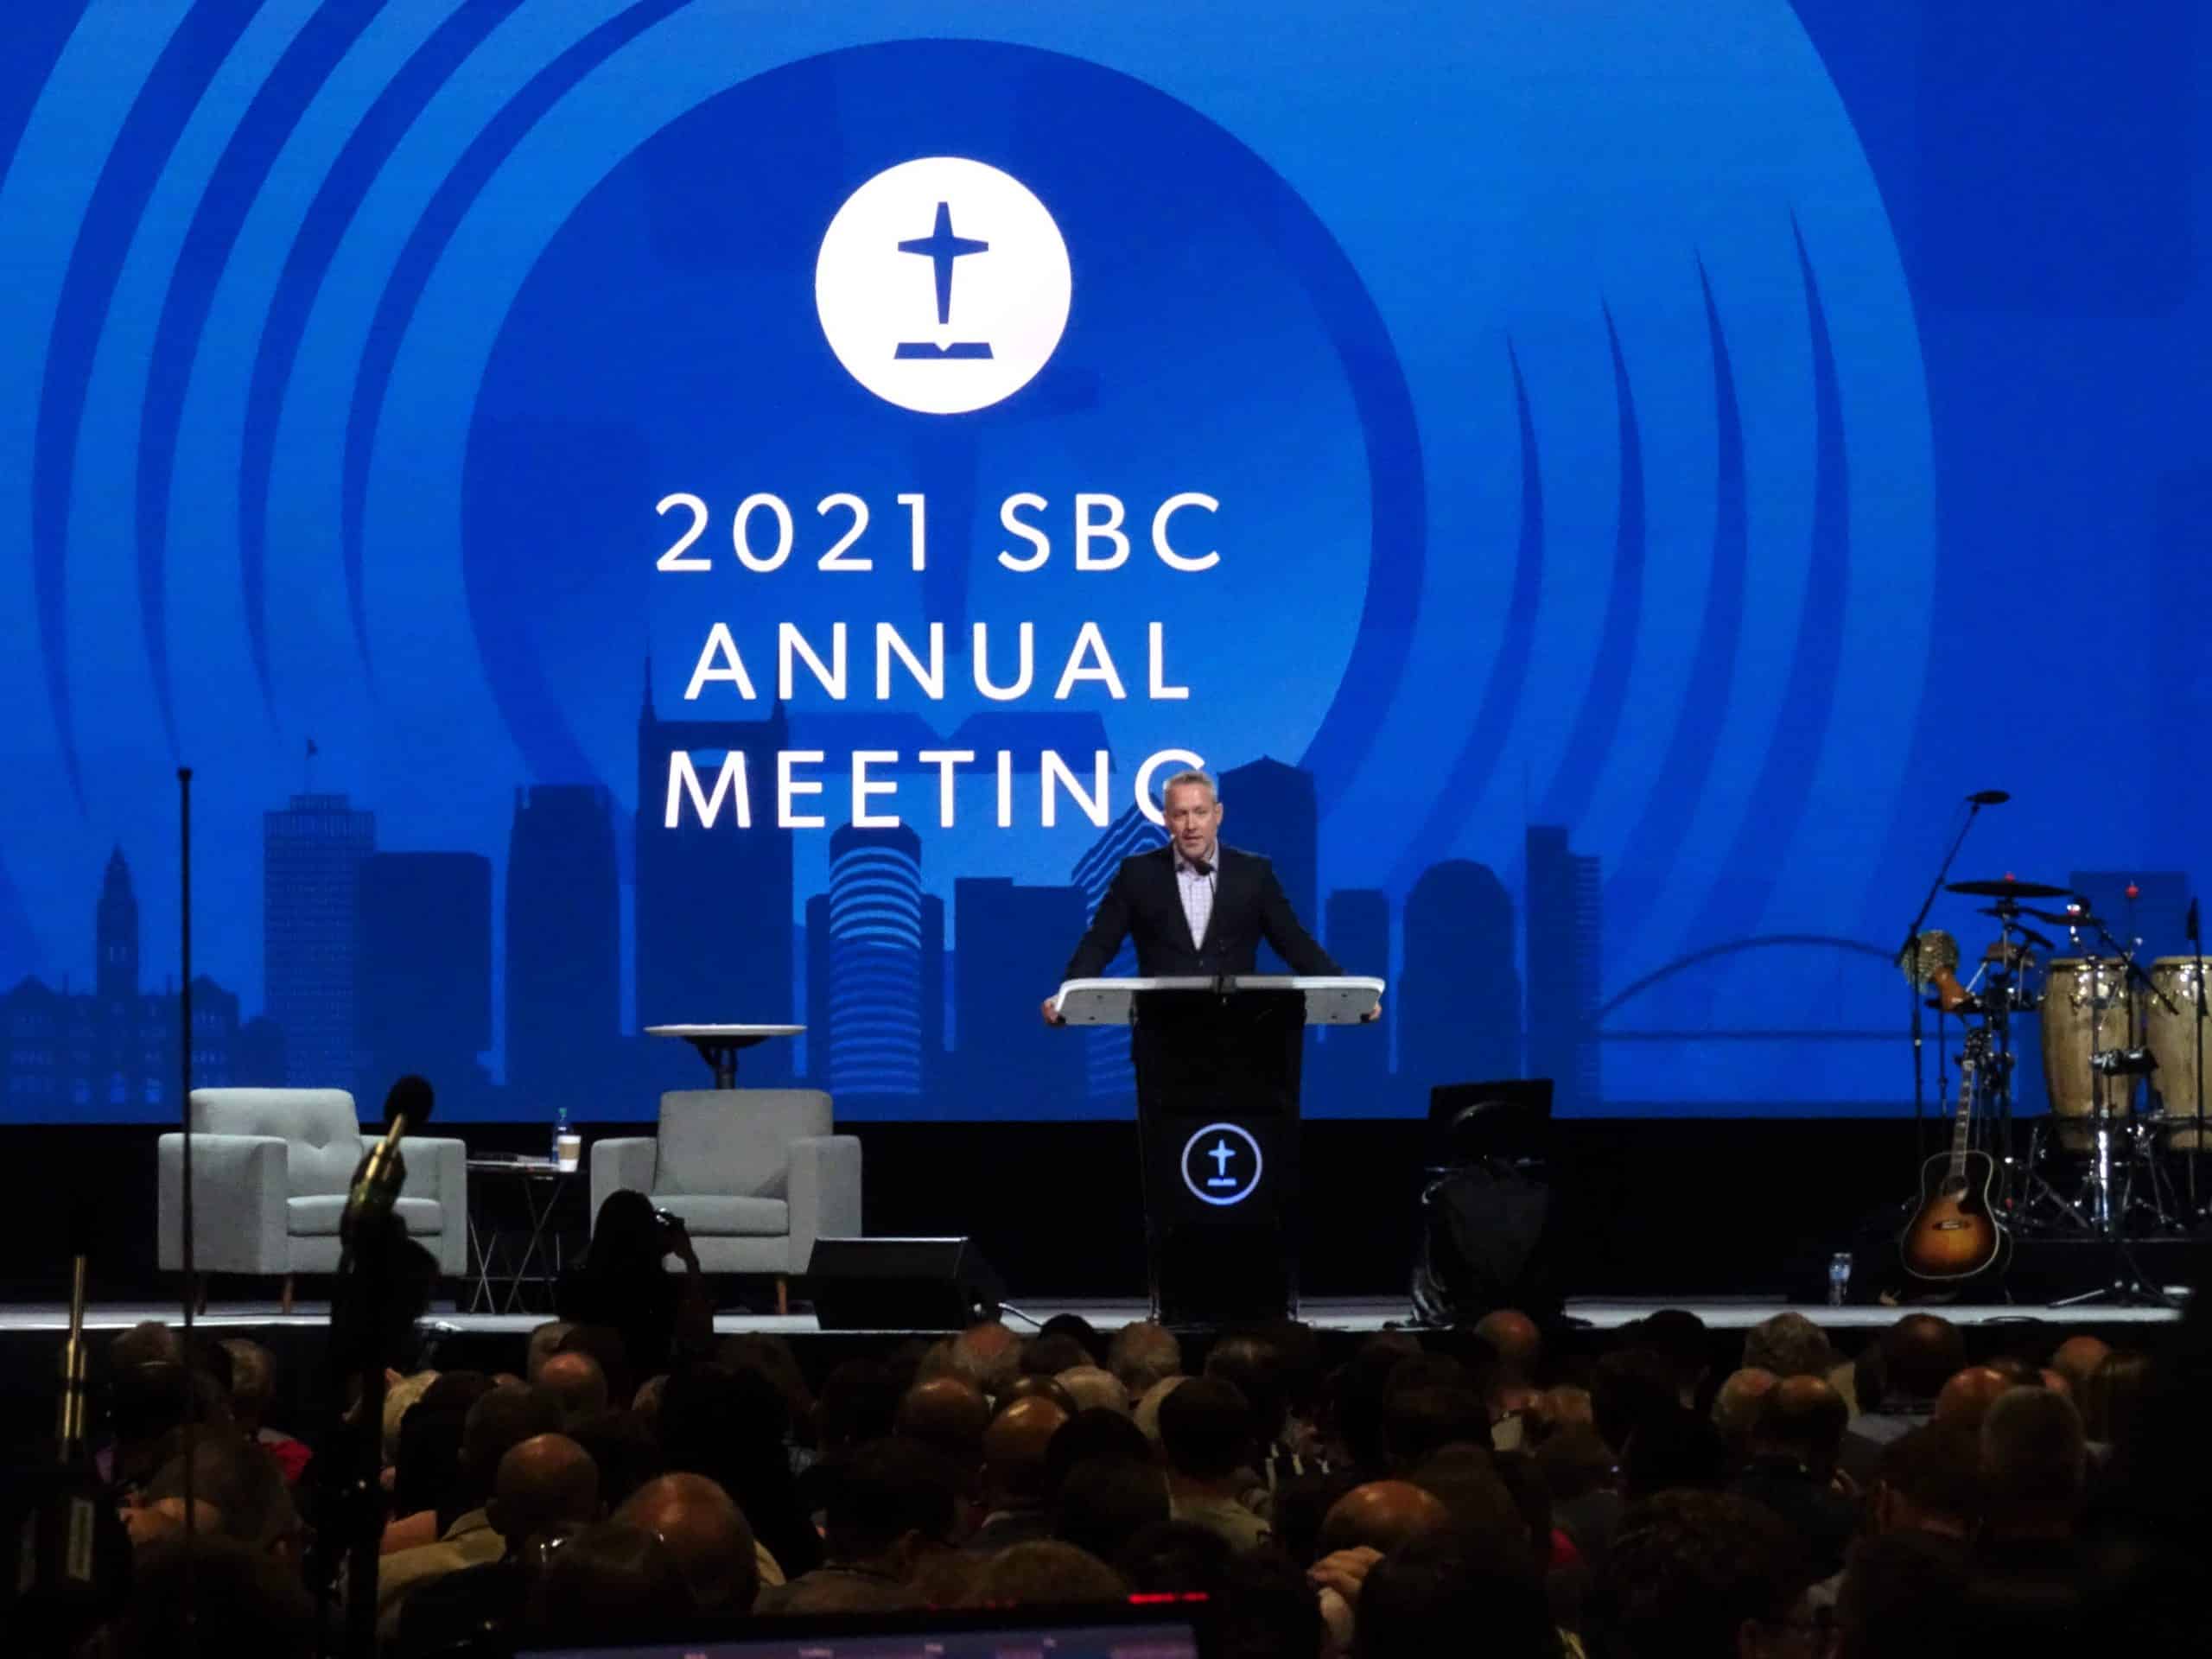 Scenes from the SBC Annual Meeting Word&Way